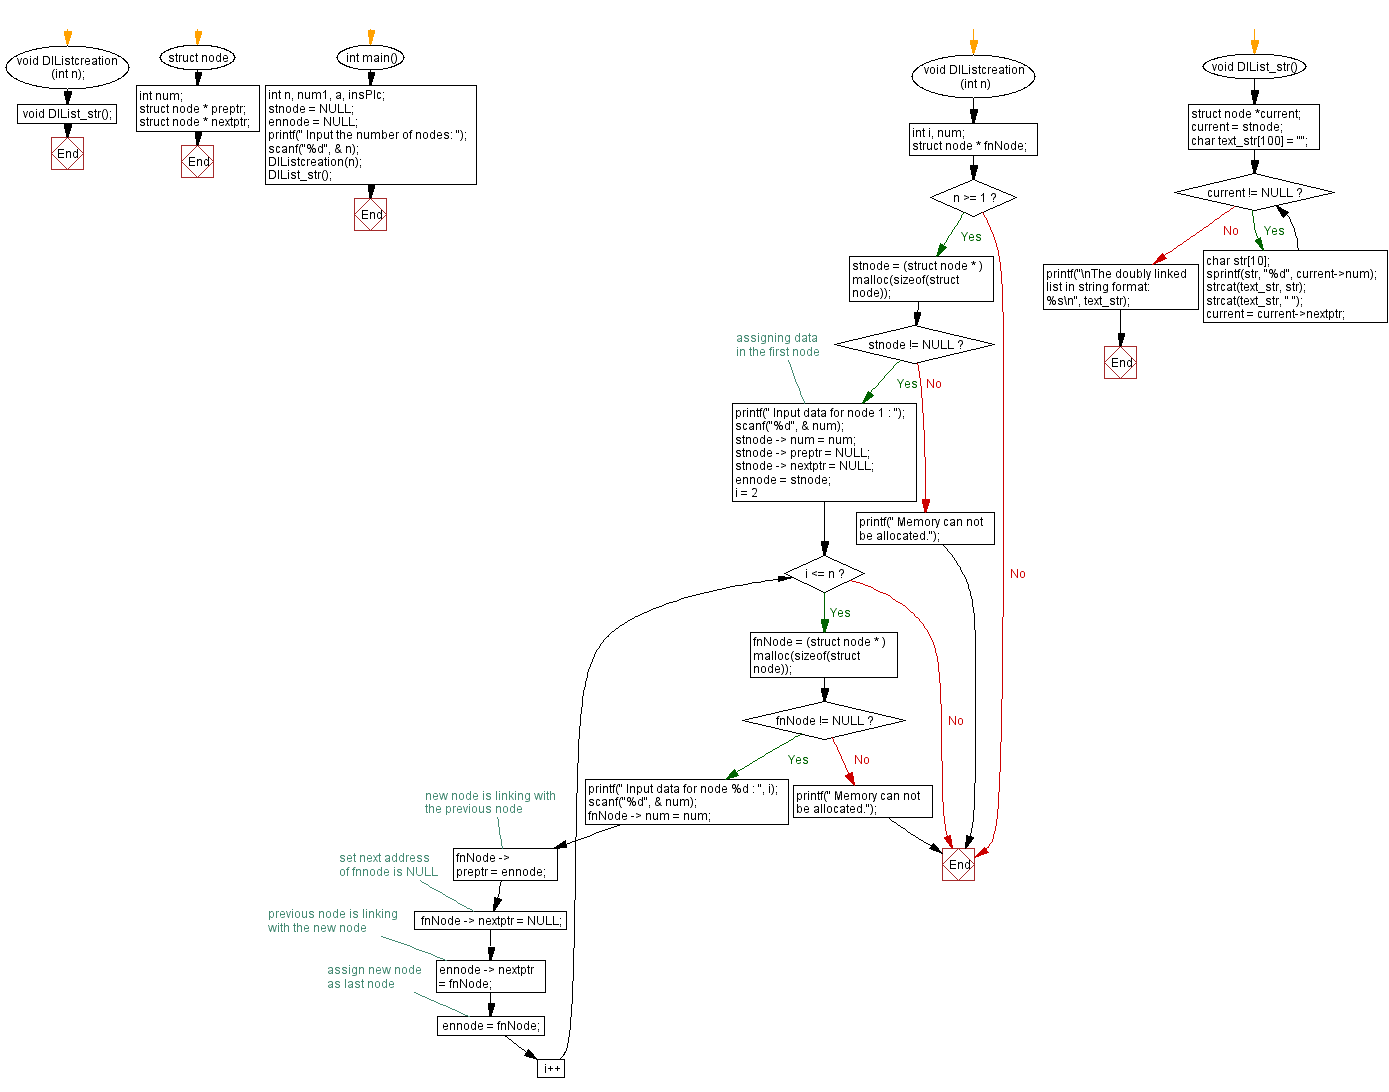 Flowchart: Convert a Doubly Linked list into a string.